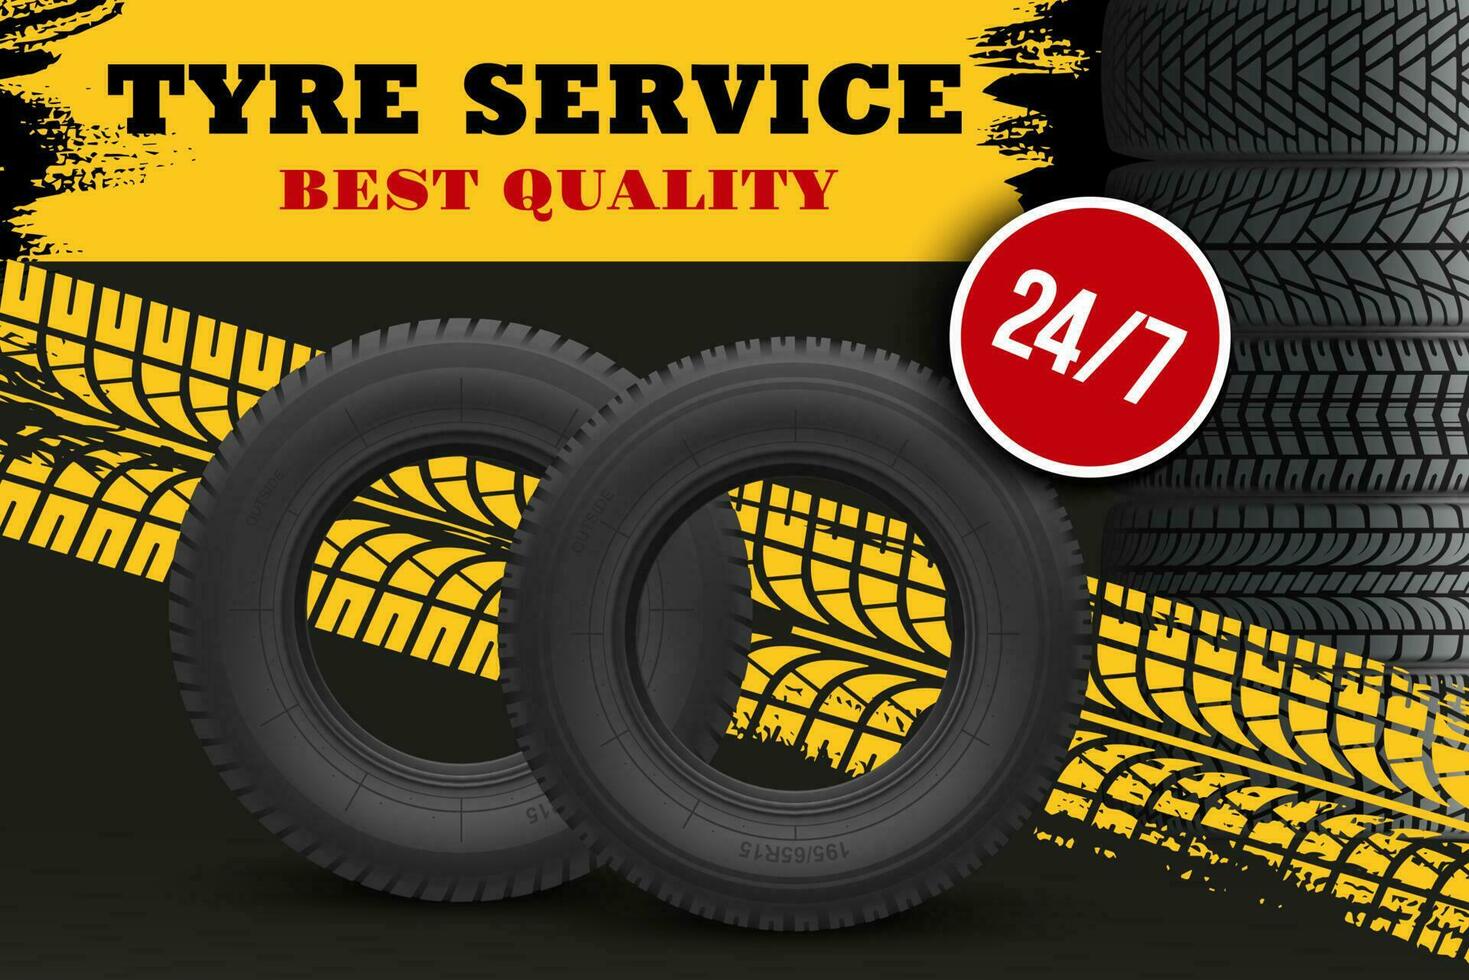 Tire repair and replacement service vector banner